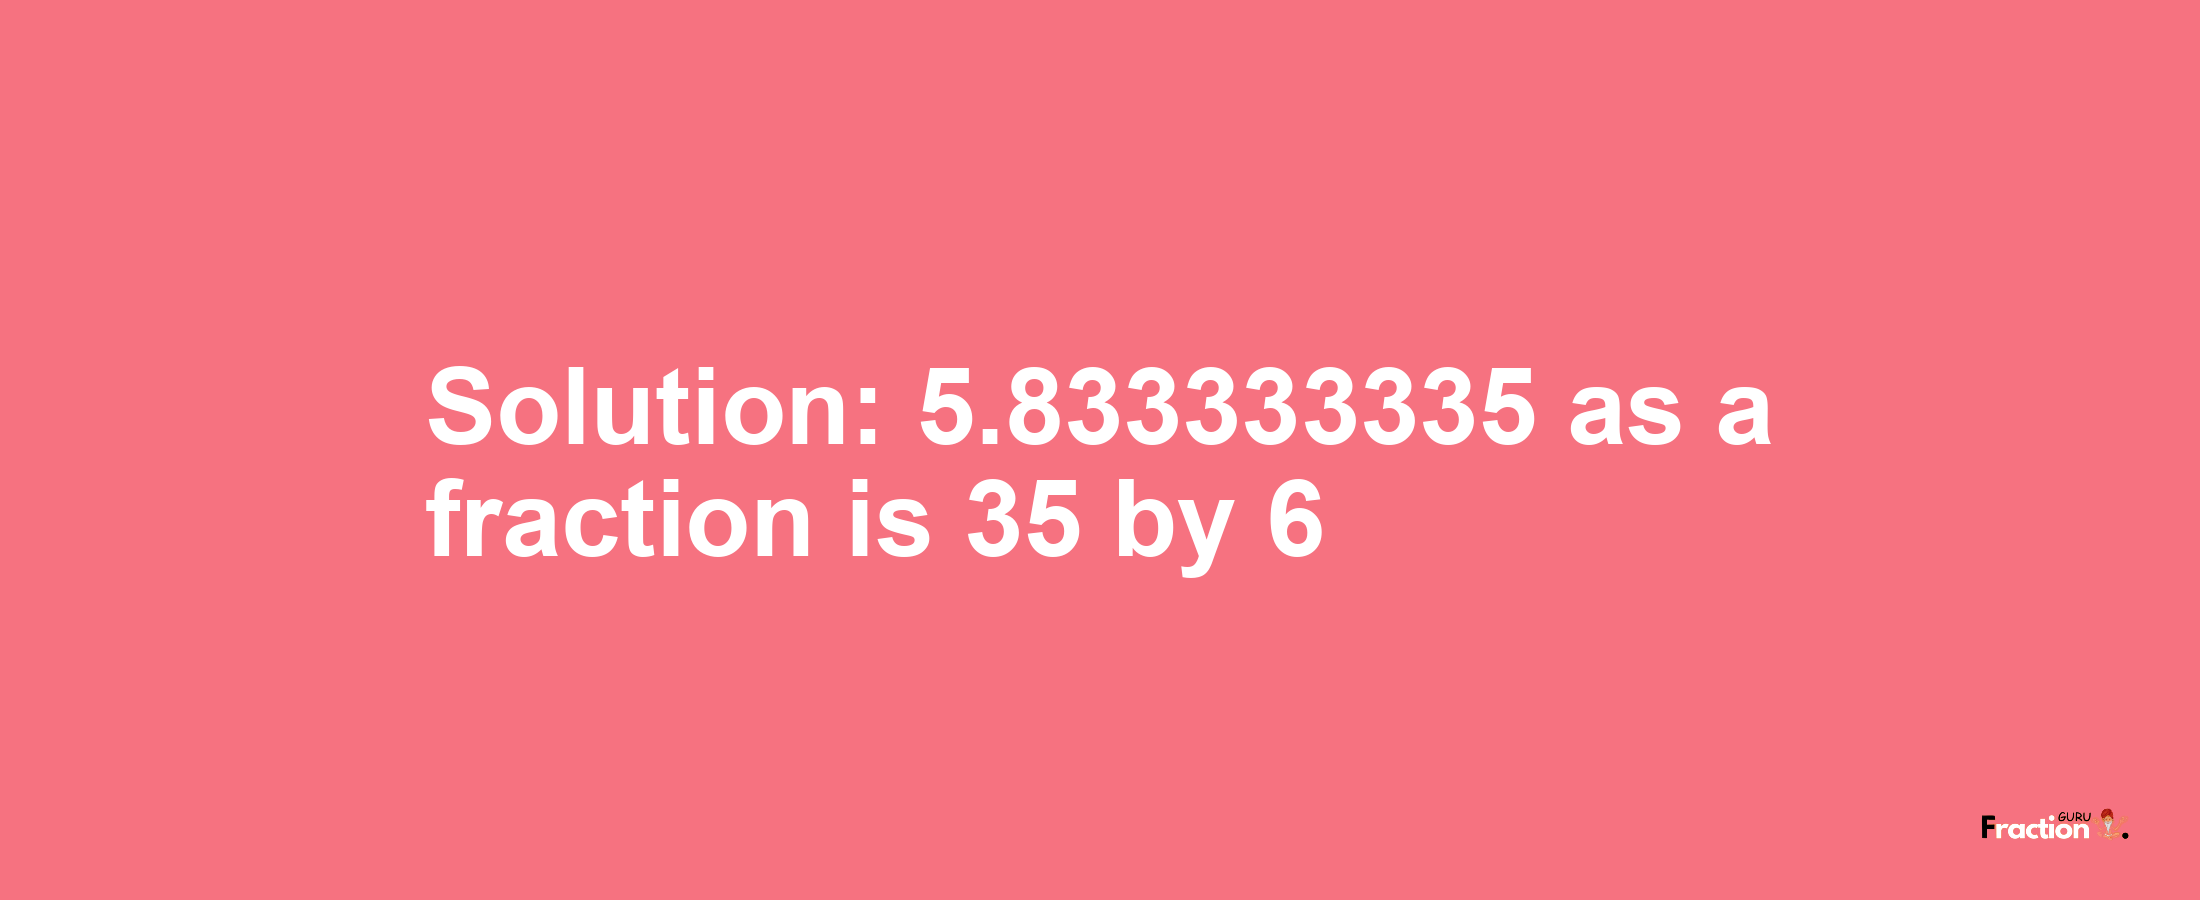 Solution:5.833333335 as a fraction is 35/6